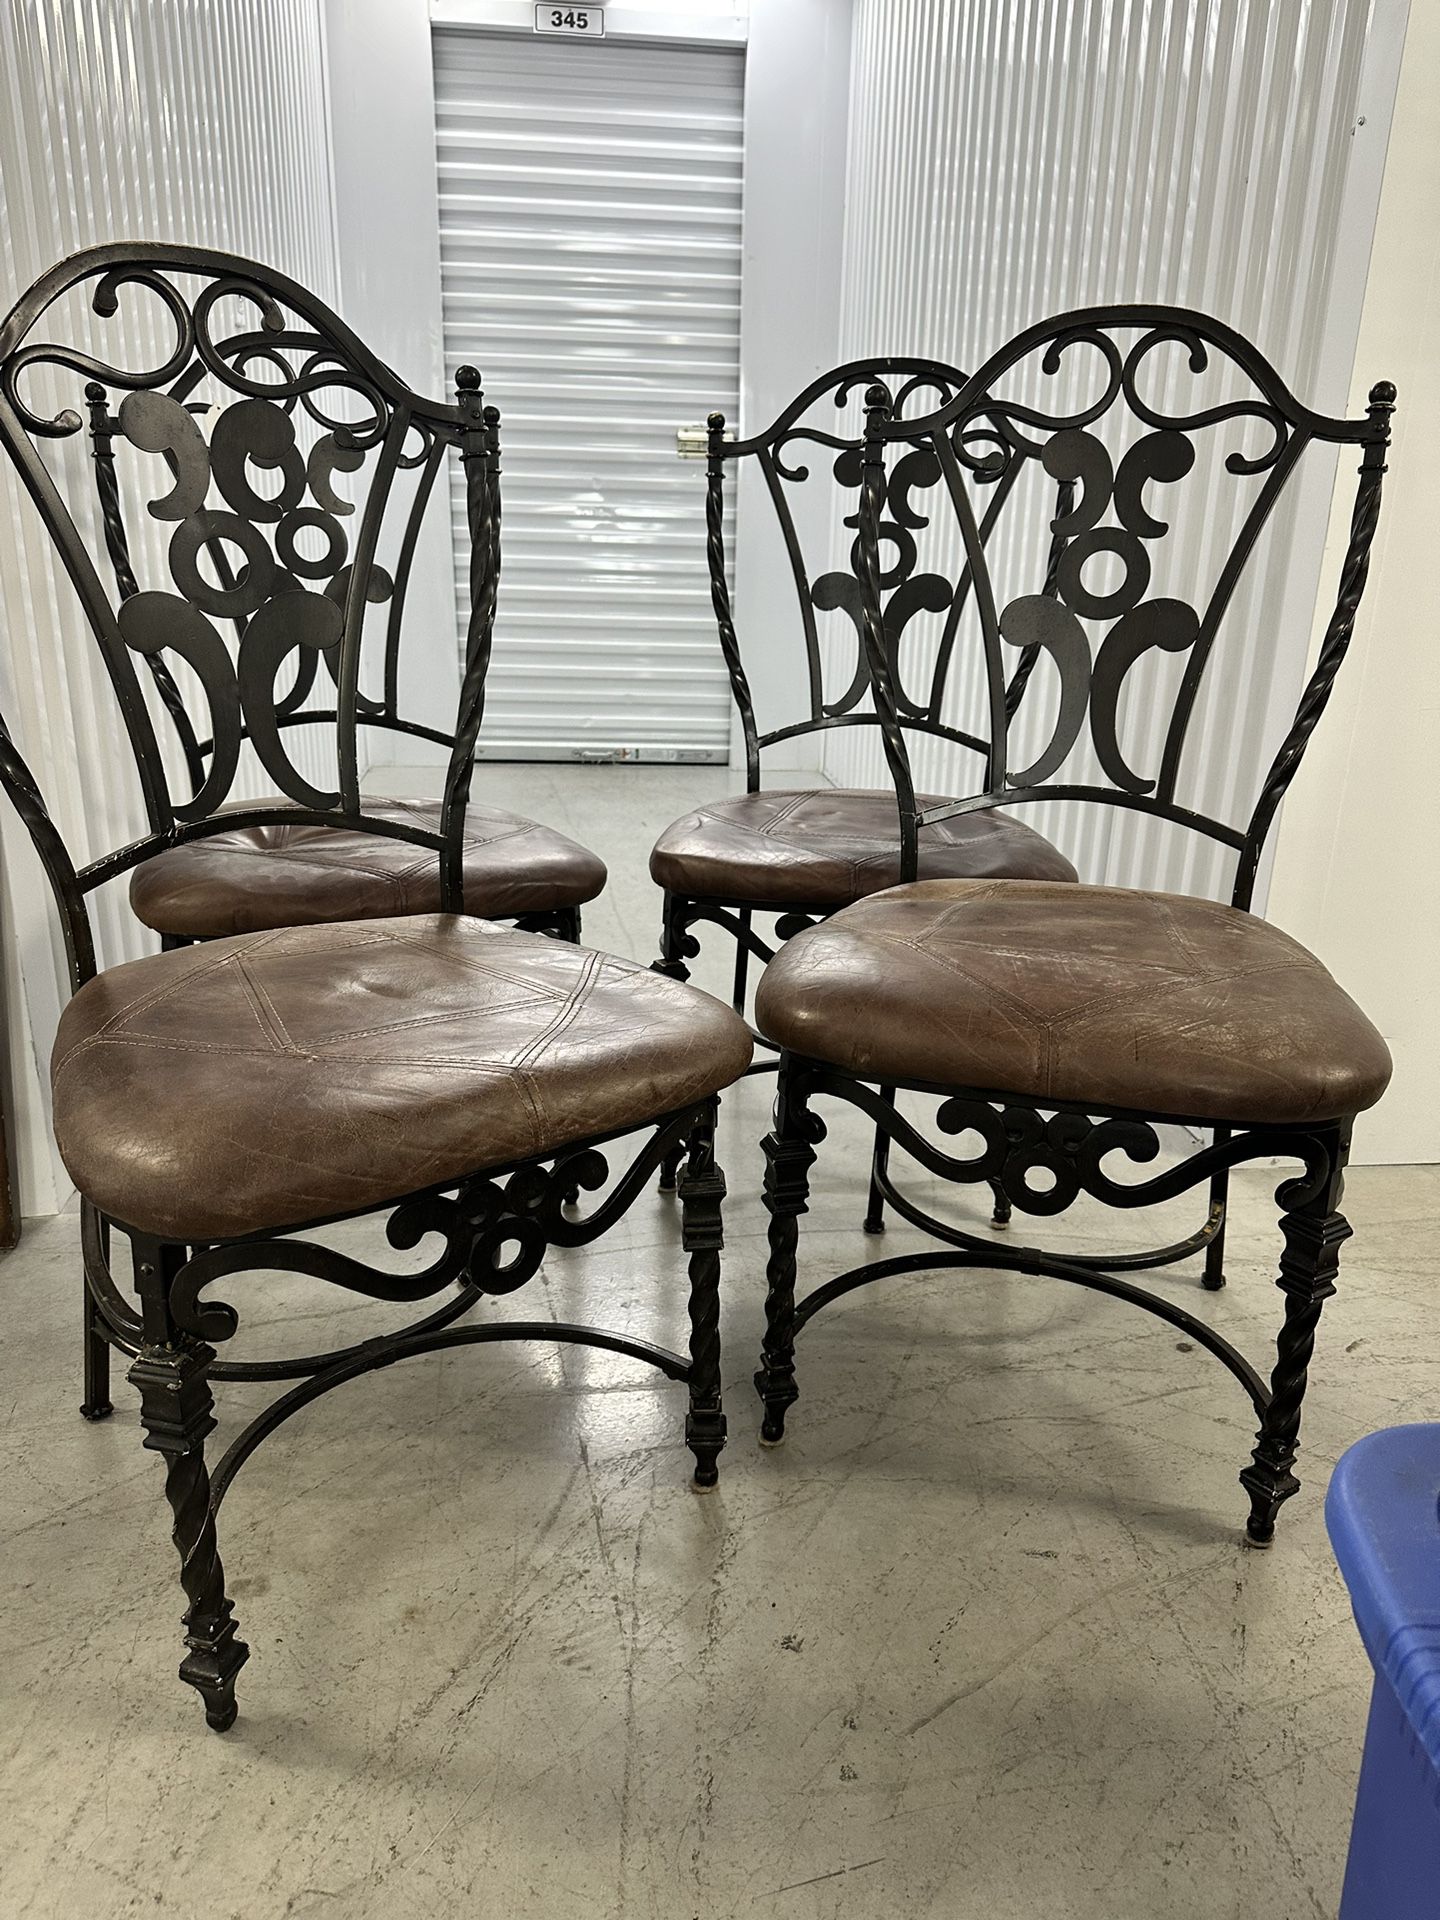 Kitchen Dining Table + 4 chairs 